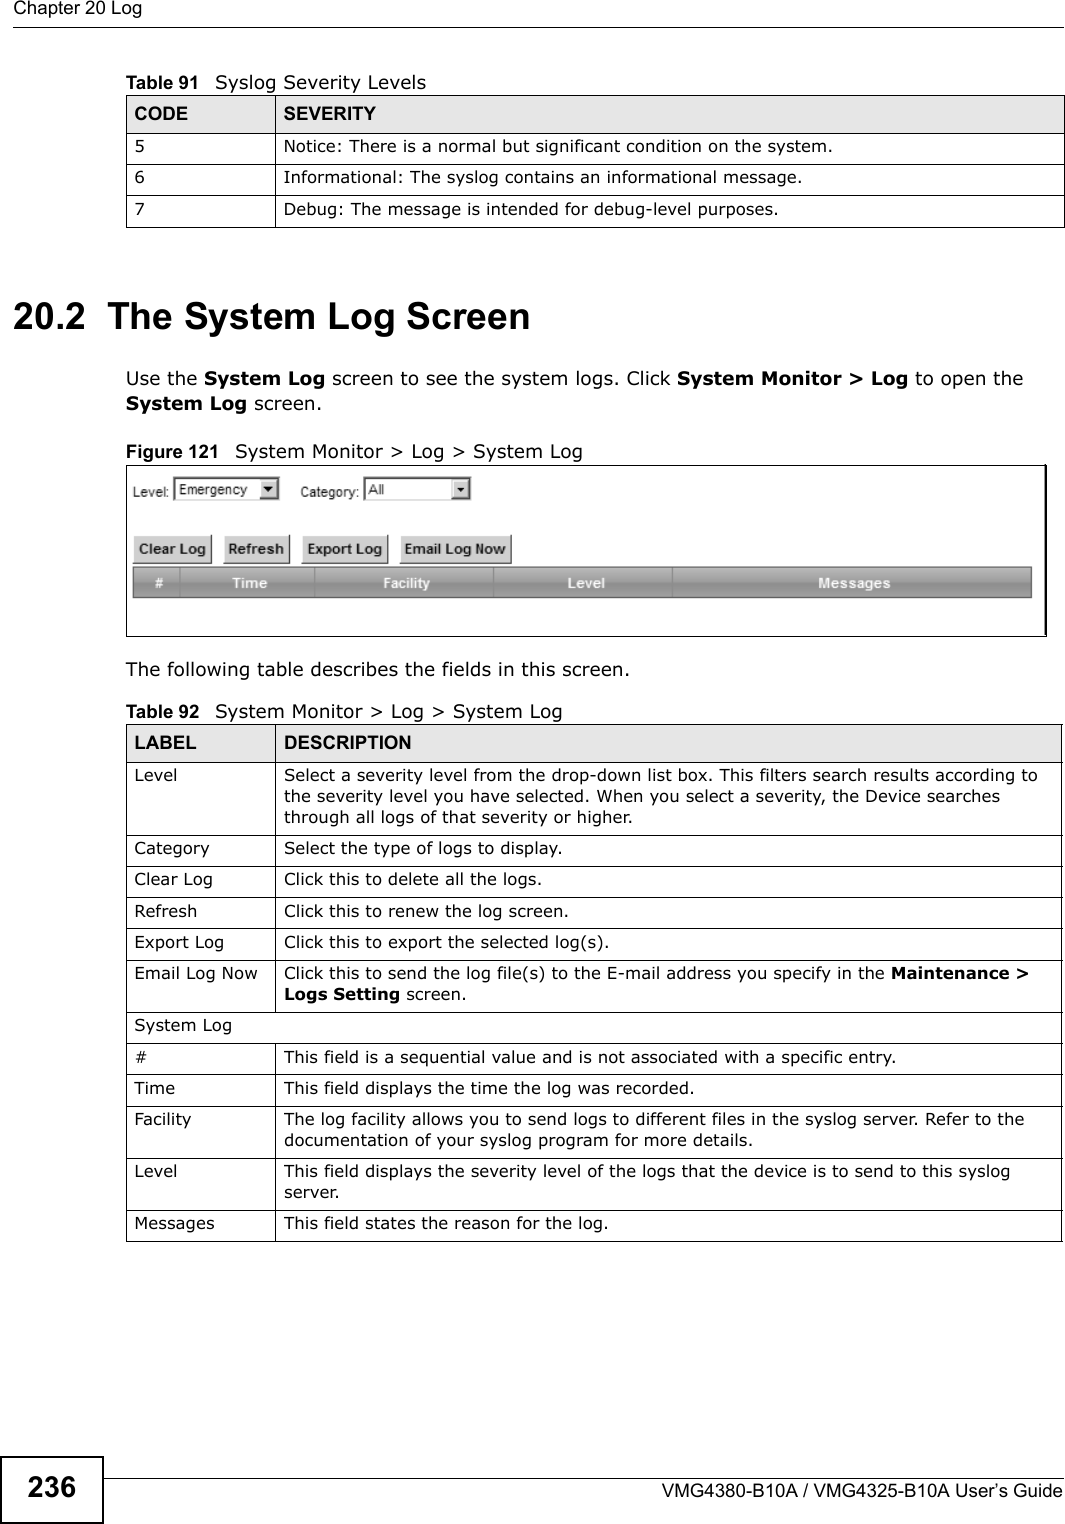 Chapter 20 LogVMG4380-B10A / VMG4325-B10A User’s Guide23620.2  The System Log Screen Use the System Log screen to see the system logs. Click System Monitor &gt; Log to open the System Log screen. Figure 121  System Monitor &gt; Log &gt; System LogThe following table describes the fields in this screen.  5 Notice: There is a normal but significant condition on the system.6 Informational: The syslog contains an informational message.7 Debug: The message is intended for debug-level purposes.Table 91   Syslog Severity LevelsCODE SEVERITYTable 92   System Monitor &gt; Log &gt; System LogLABEL DESCRIPTIONLevel Select a severity level from the drop-down list box. This filters search results according to the severity level you have selected. When you select a severity, the Device searchesthrough all logs of that severity or higher. Category Select the type of logs to display.Clear Log  Click this to delete all the logs. Refresh Click this to renew the log screen. Export Log Click this to export the selected log(s).Email Log Now Click this to send the log file(s) to the E-mail address you specify in the Maintenance &gt; Logs Setting screen.System Log# This field is a sequential value and is not associated with a specific entry.Time This field displays the time the log was recorded. Facility The log facility allows you to send logs to different files in the syslog server. Refer to the documentation of your syslog program for more details.Level This field displays the severity level of the logs that the device is to send to this syslog server.Messages This field states the reason for the log.